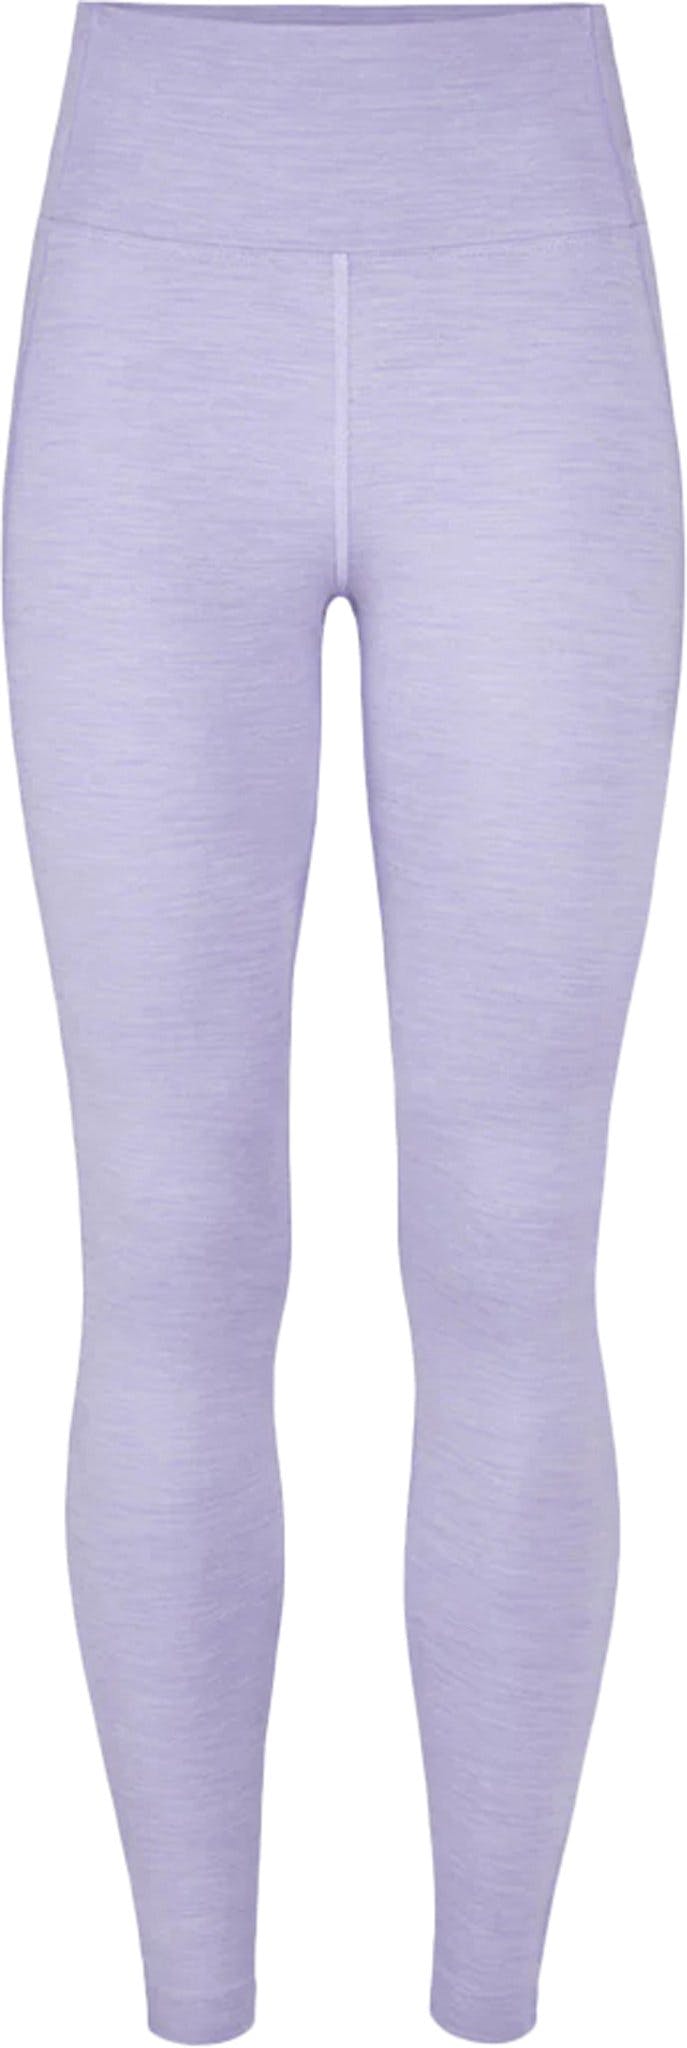 Product image for Natural Flow Legging - Women's